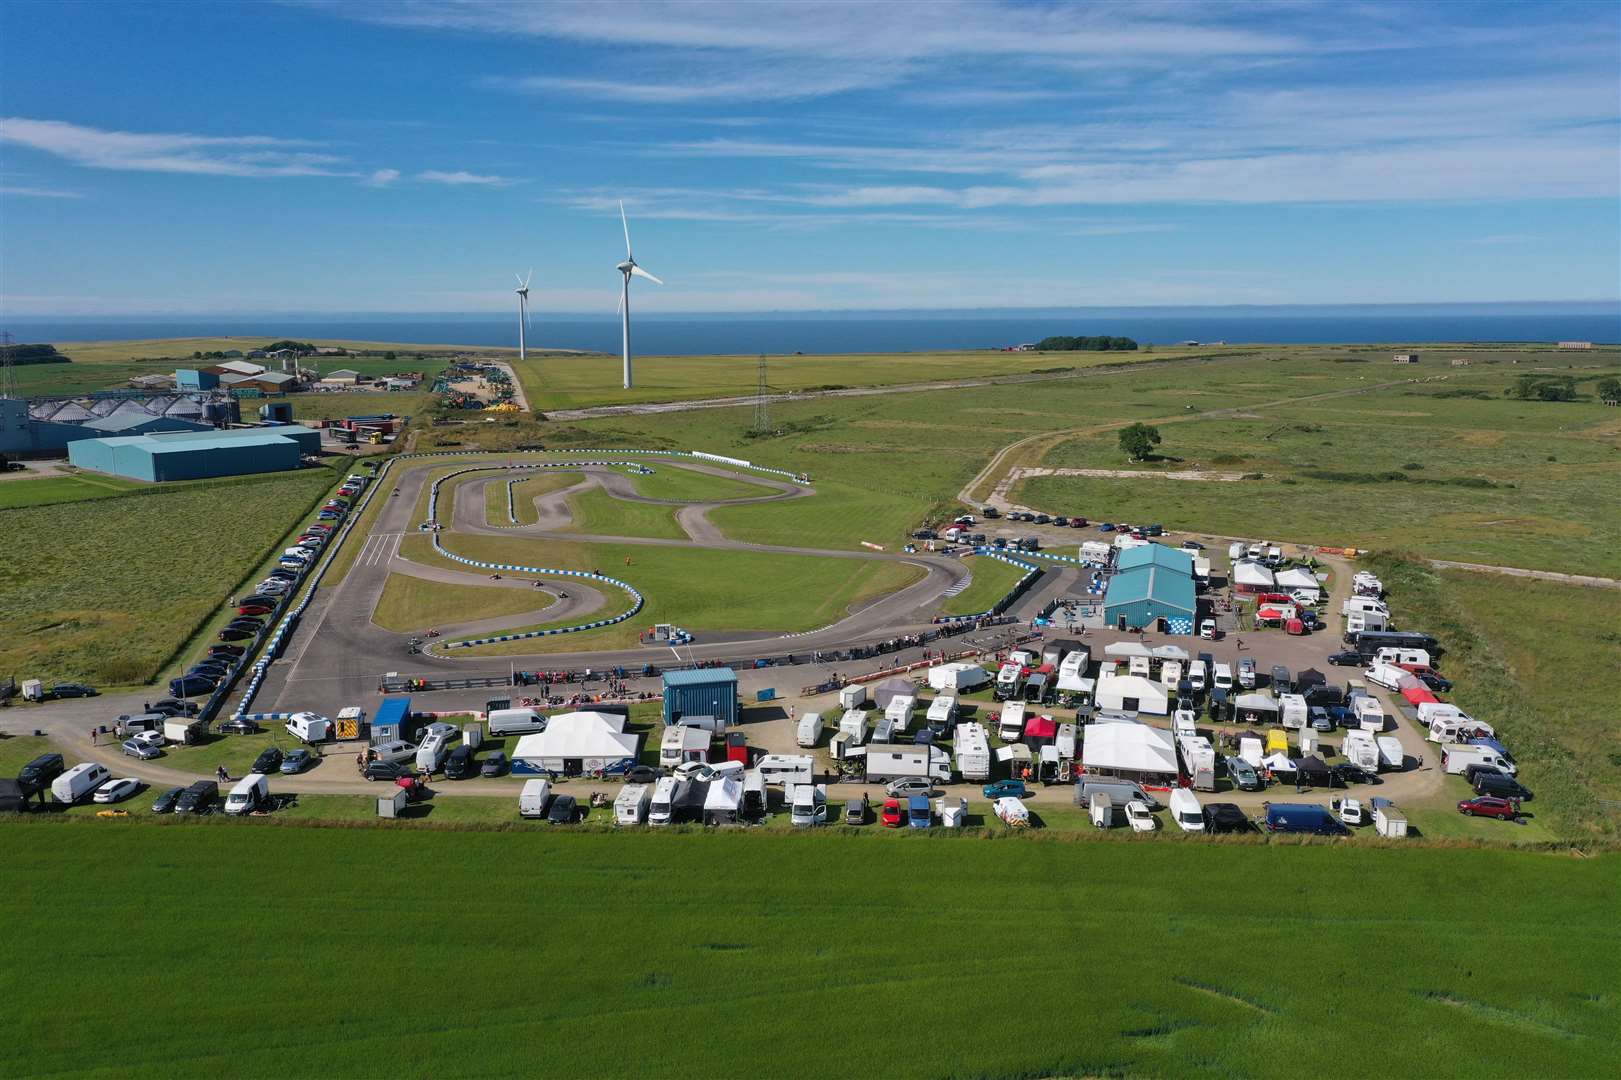 An open day will celebrate 60 years of kart racing at the Boyndie Drome circuit.